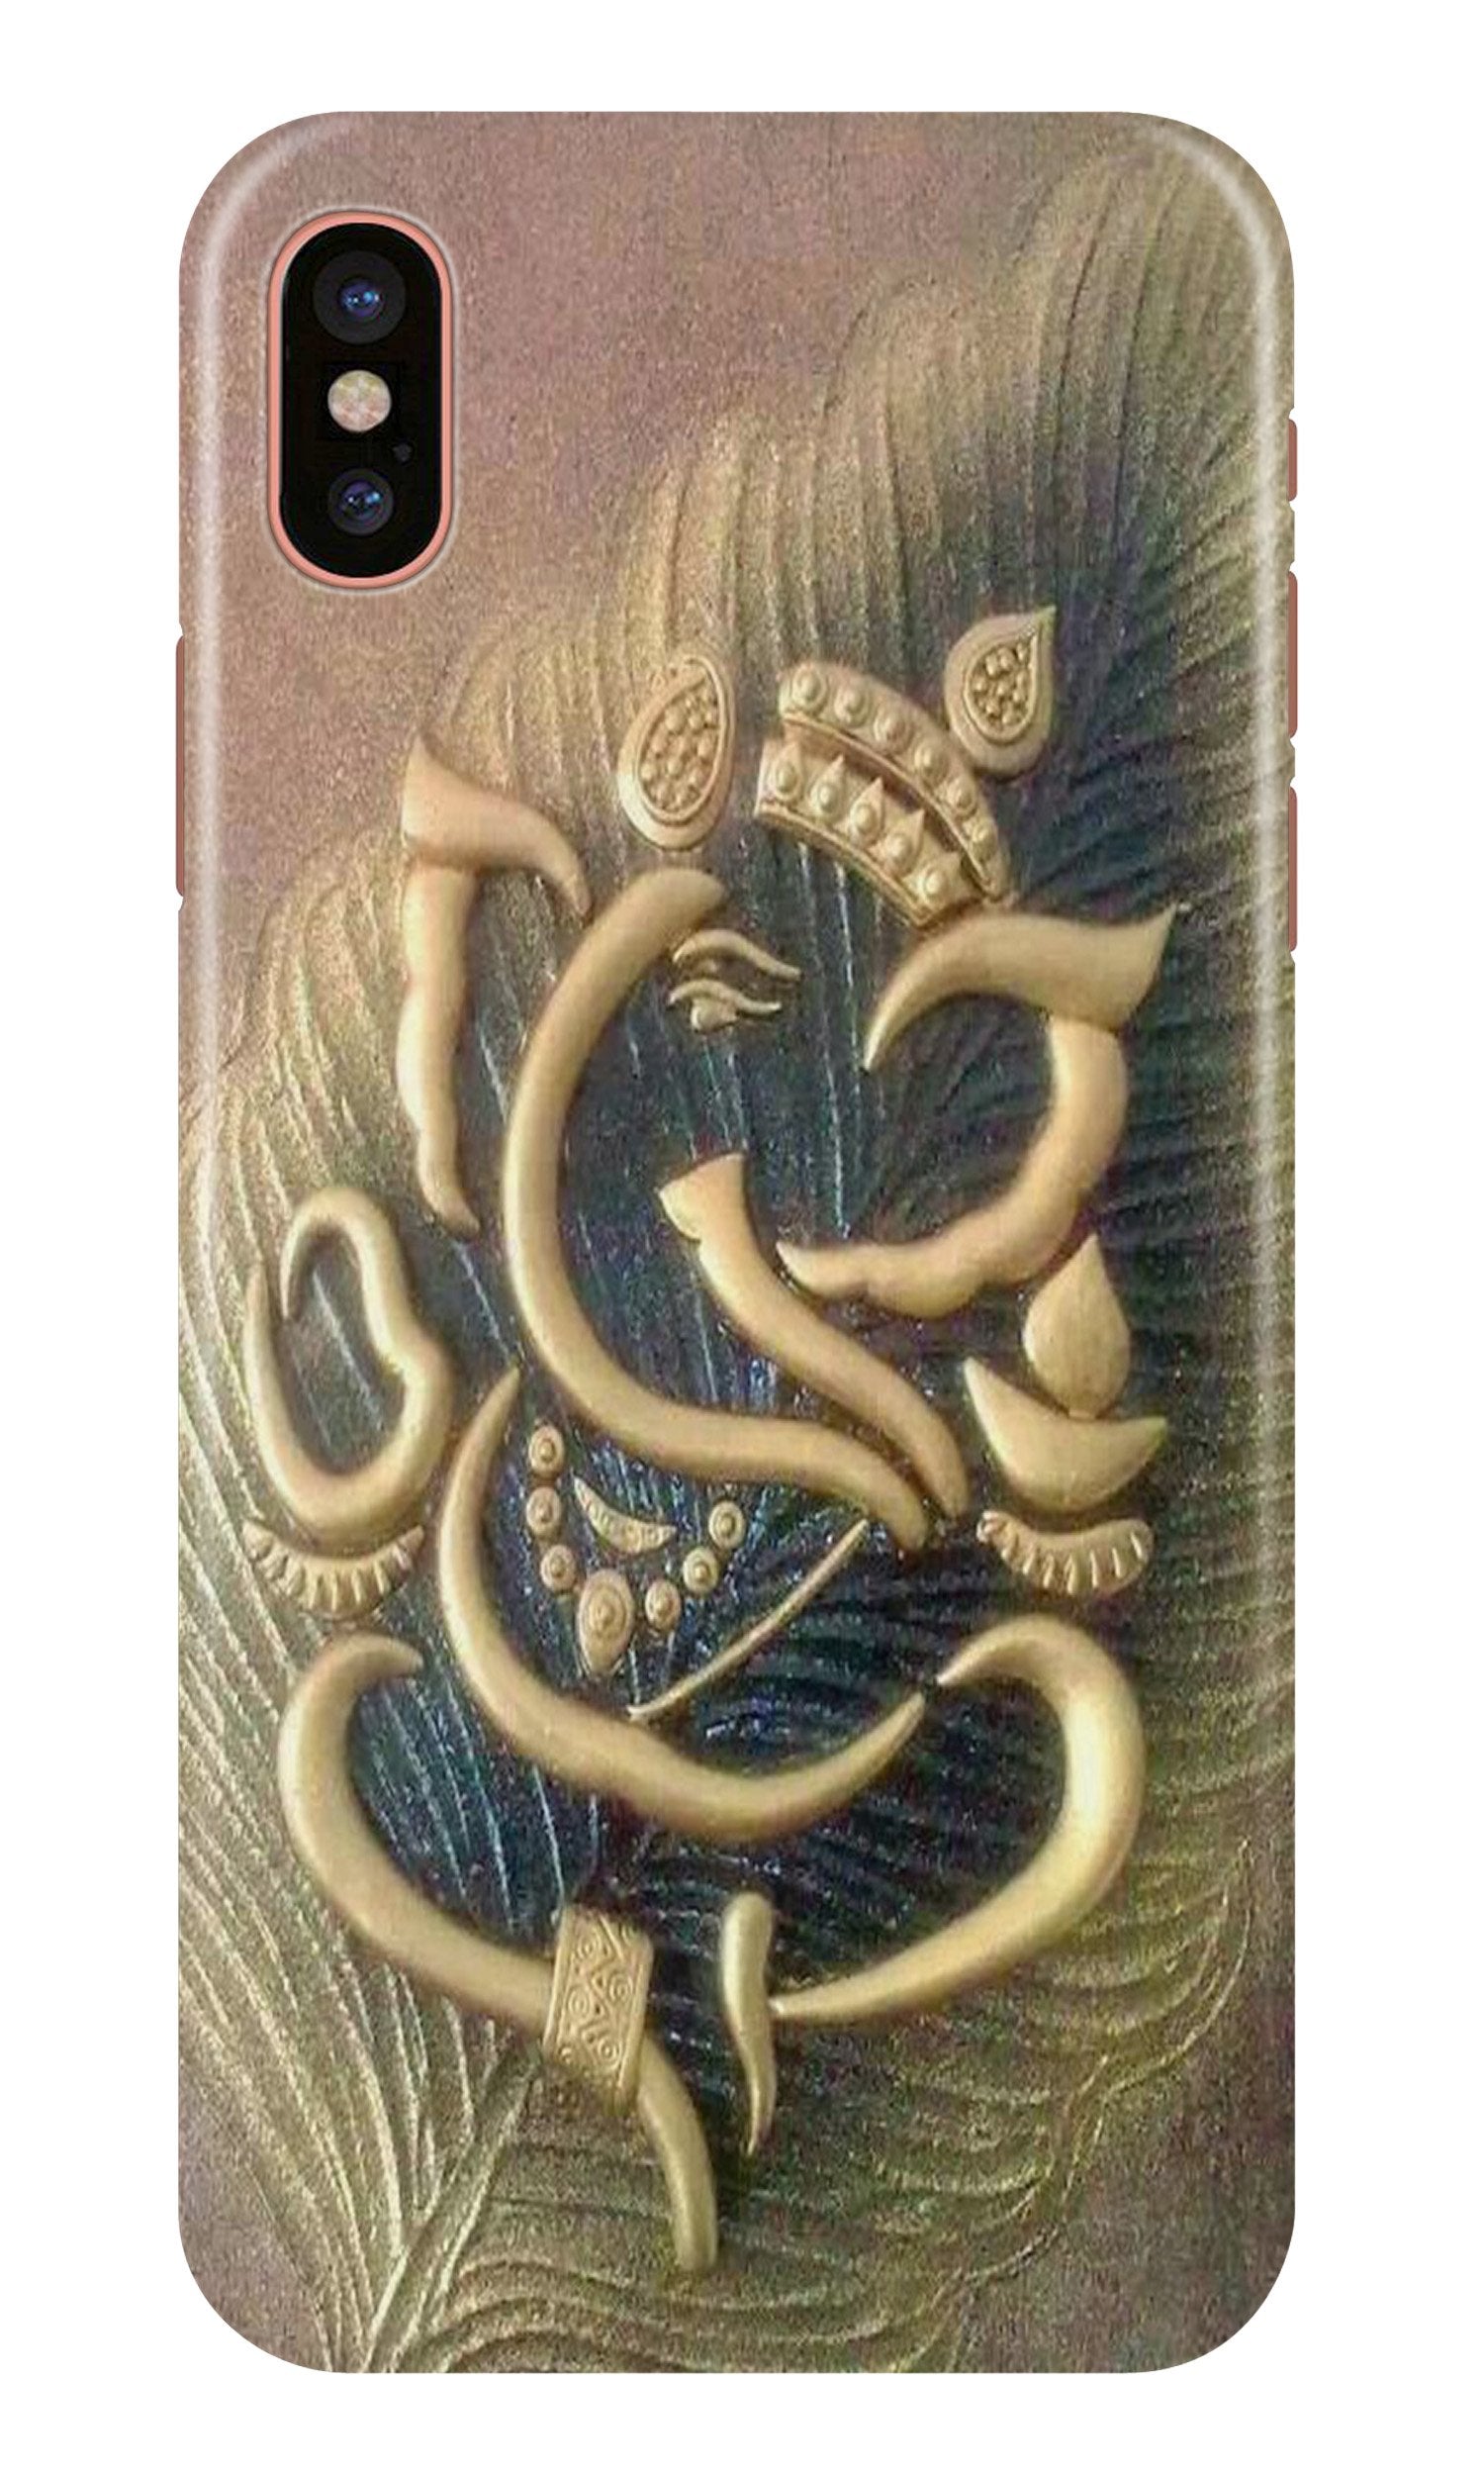 Lord Ganesha Case for iPhone Xs